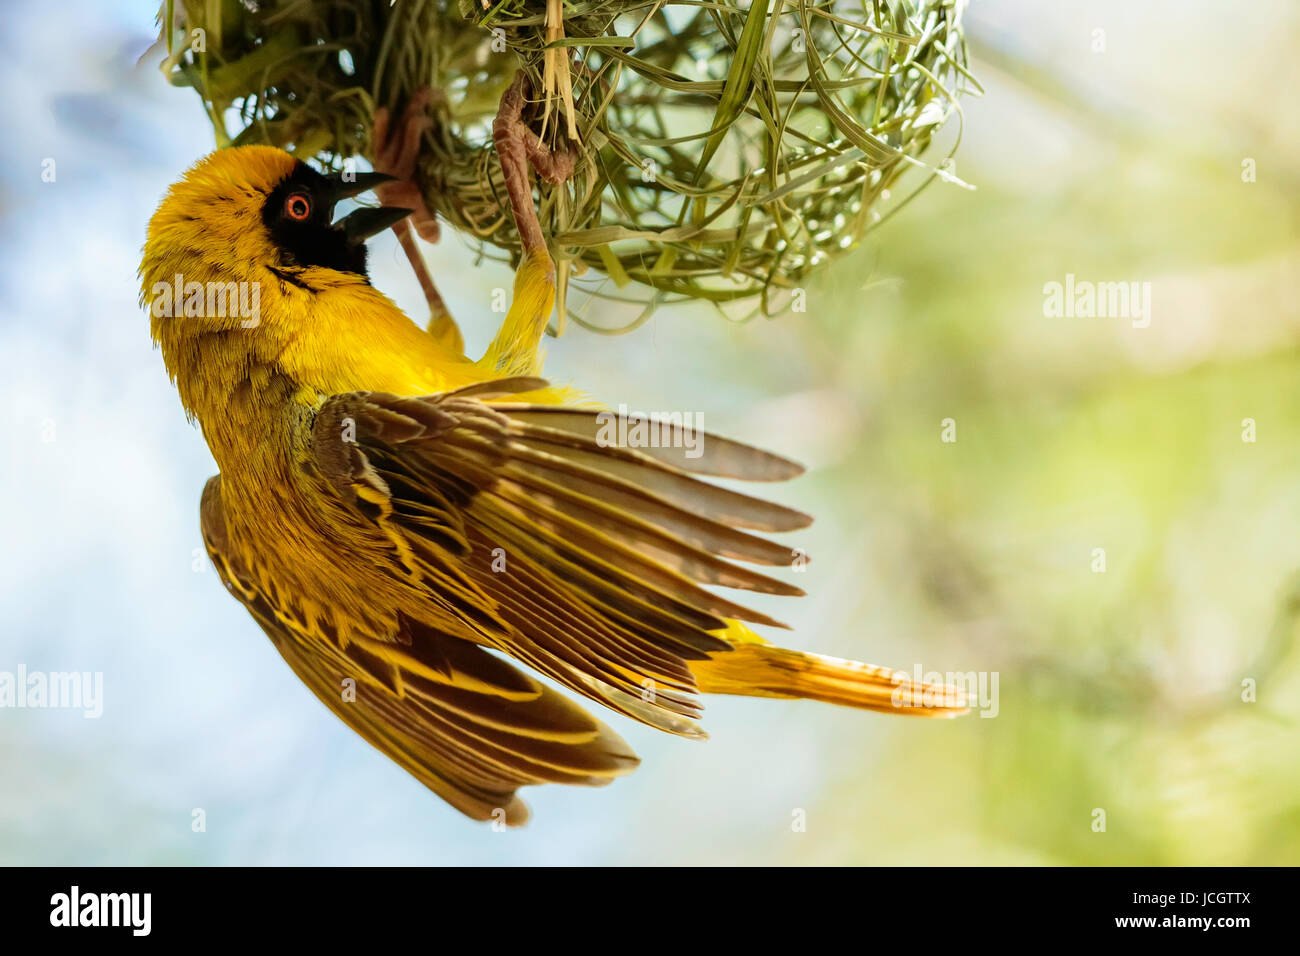 Single Male Southern Masked Weaver (Ploceus velatus) bird constructing his nest, hanging and fluttering his wings, Karoo National Park - South Africa. Stock Photo